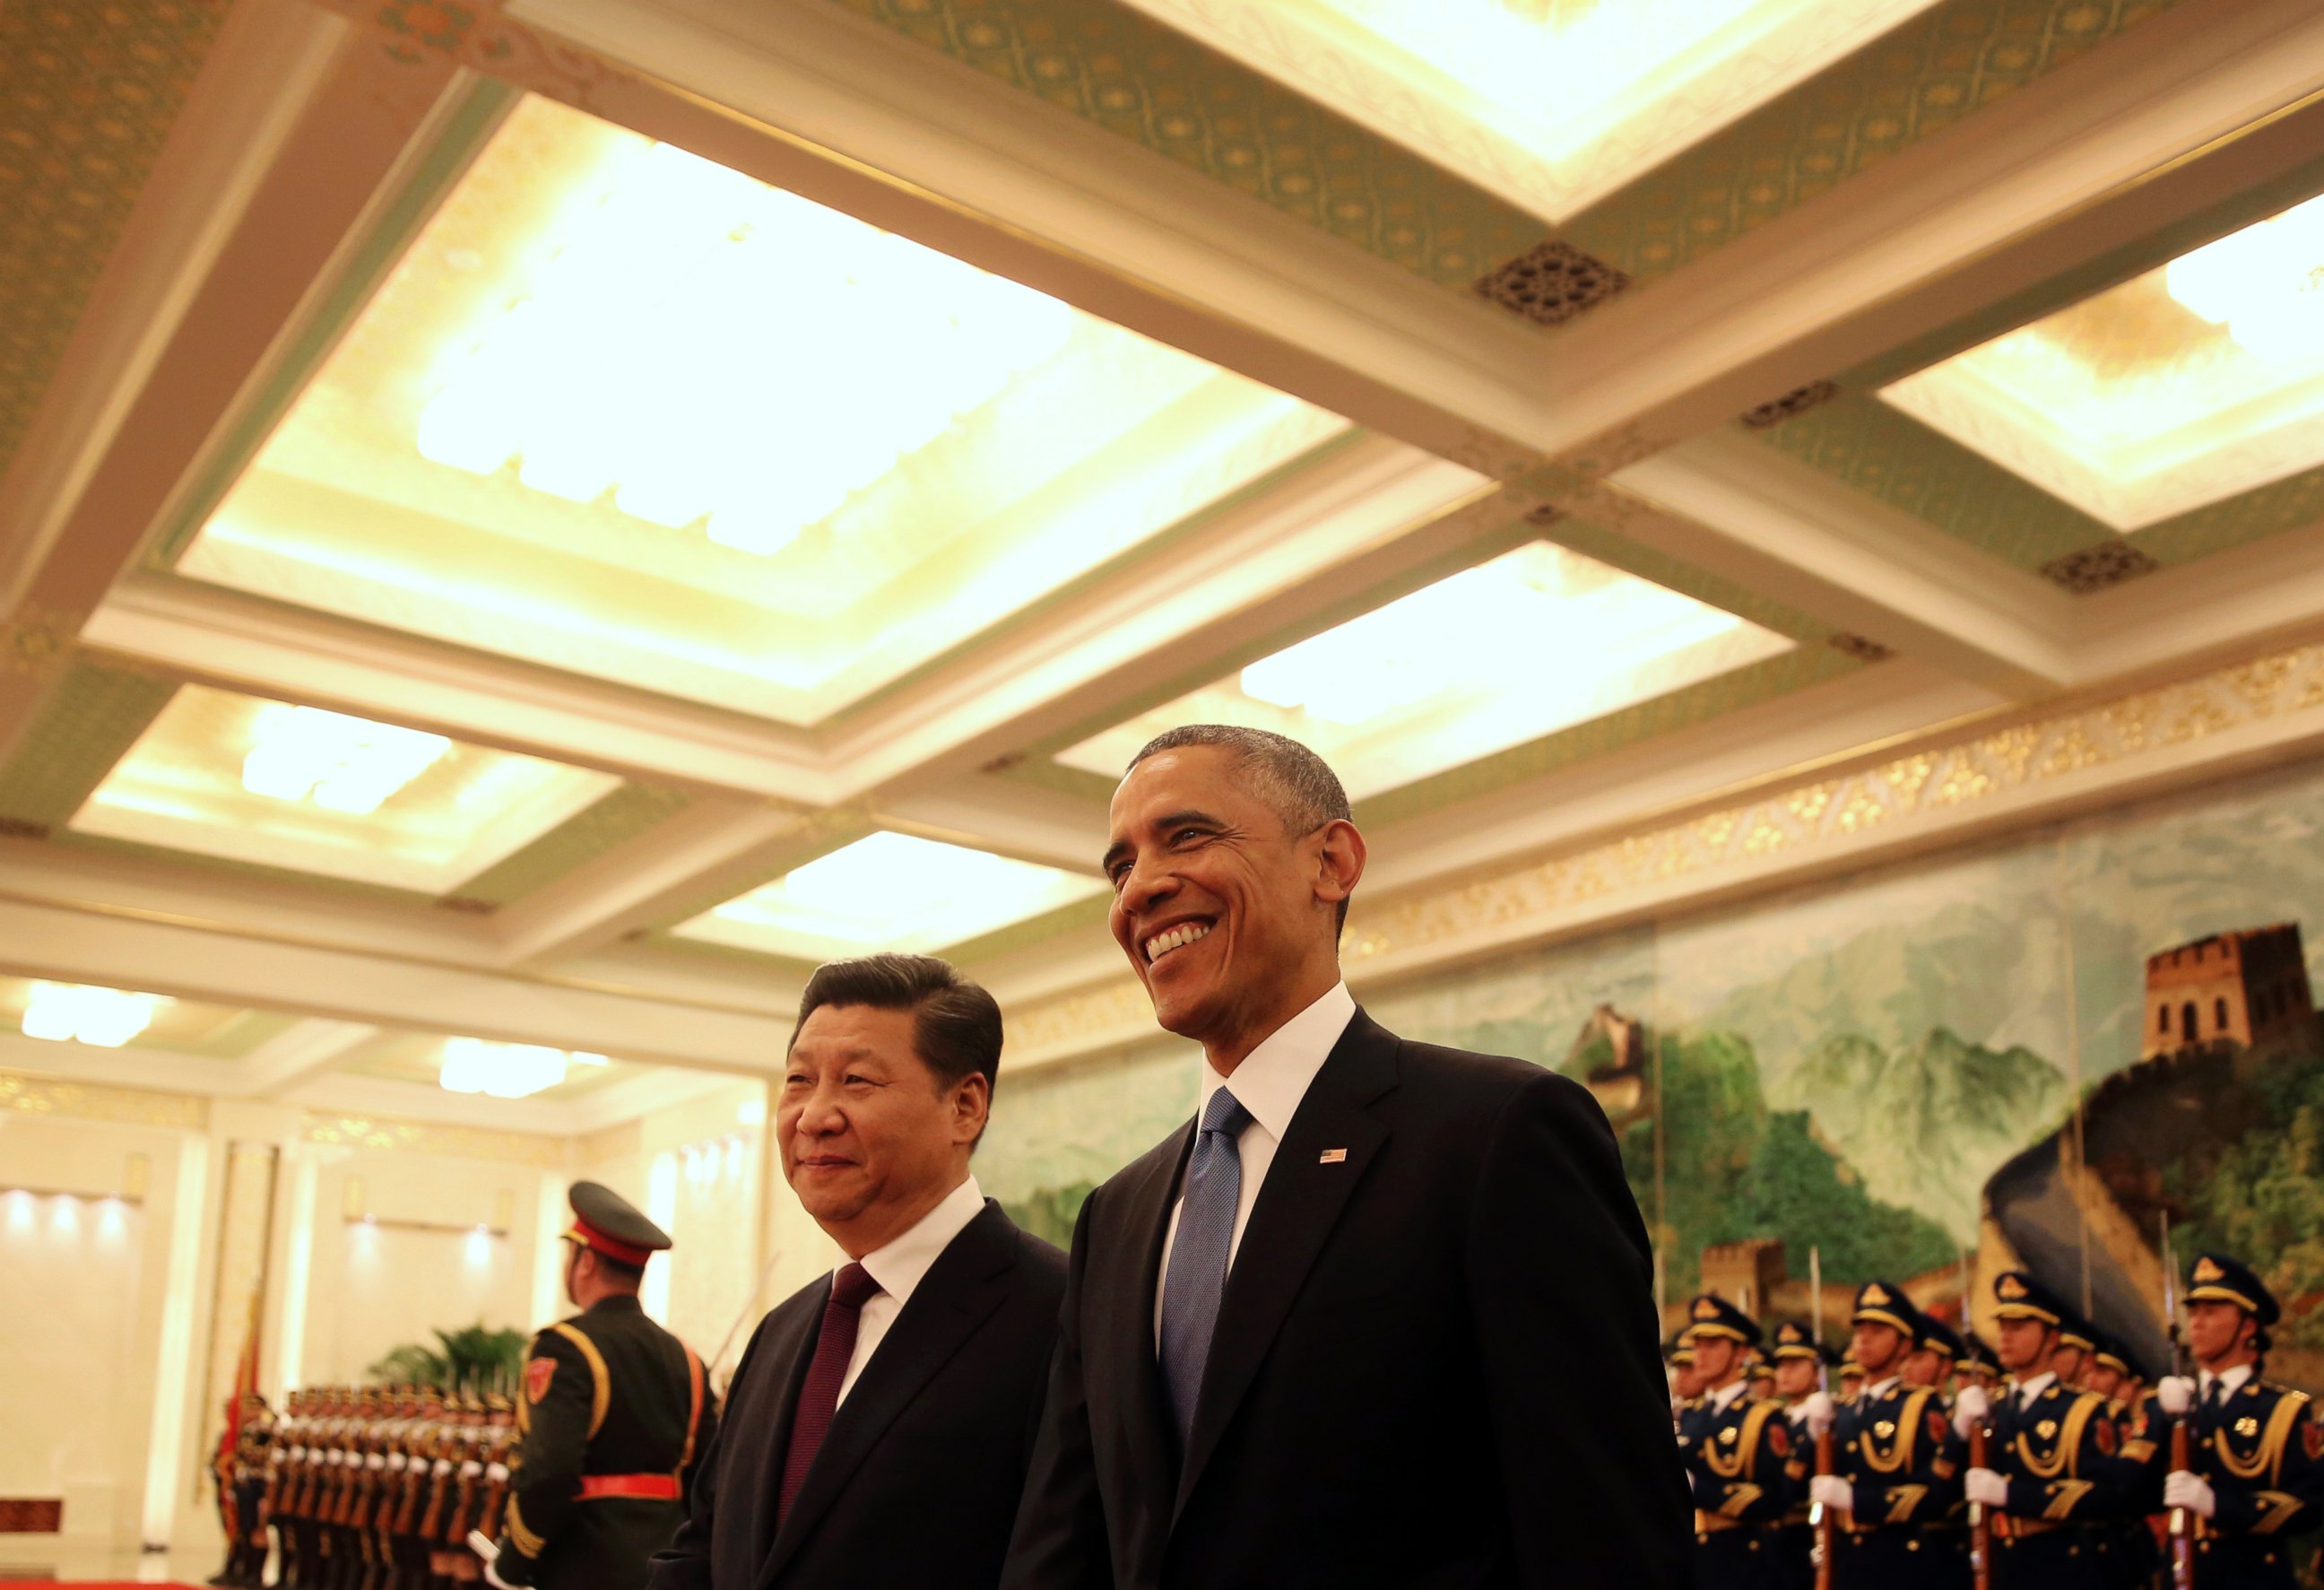 U.S. President Barack Obama, right, smiles after a group of children waved flags and flowers to cheer him during a welcome ceremony with Chinese President Xi Jinping at the Great Hall of the People in Beijing, Nov. 12, 2014.